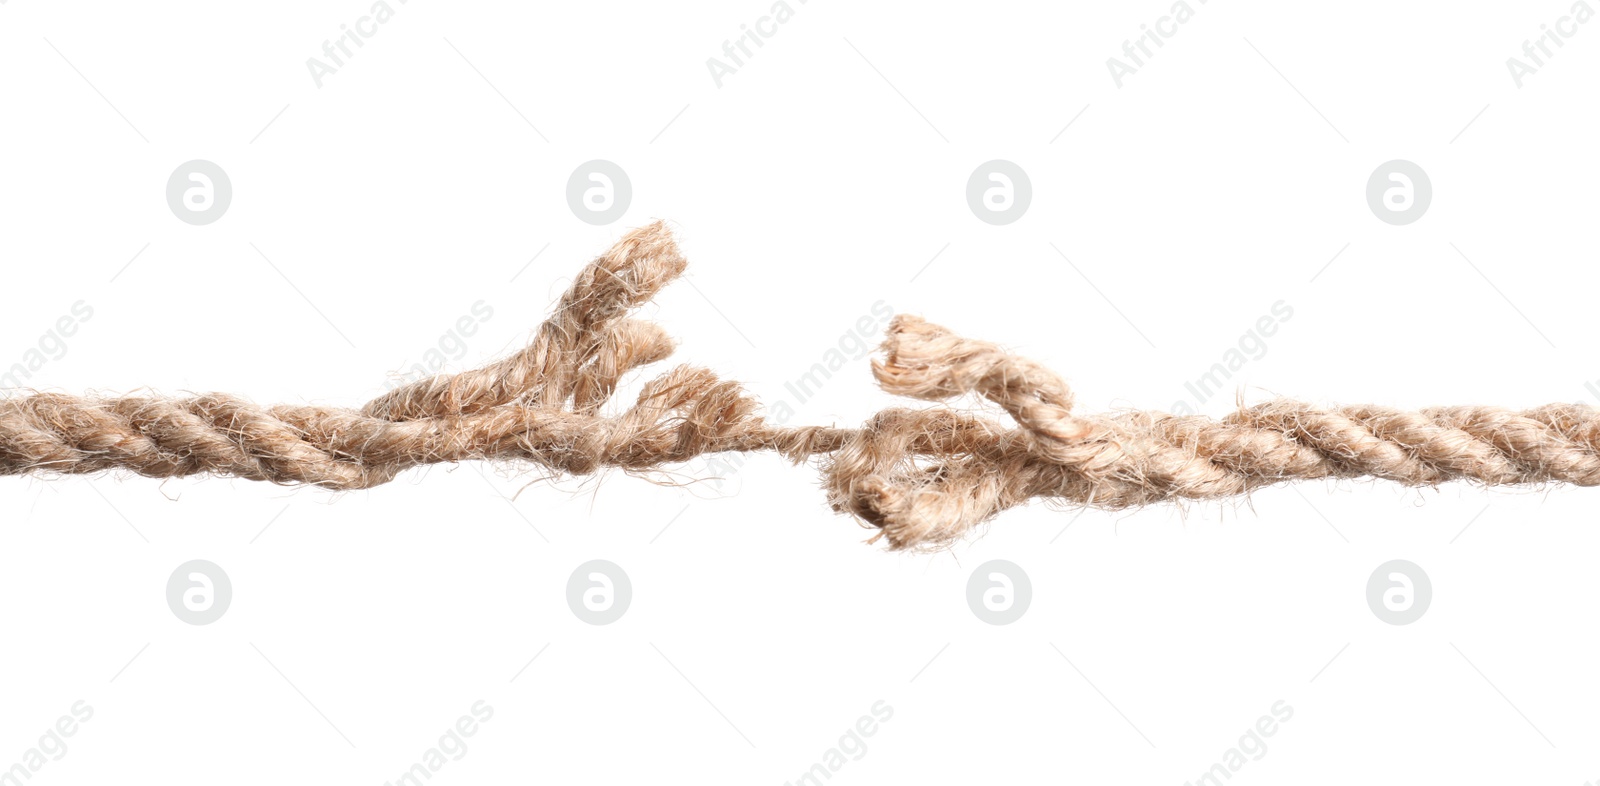 Photo of Rupture of cotton rope on white background